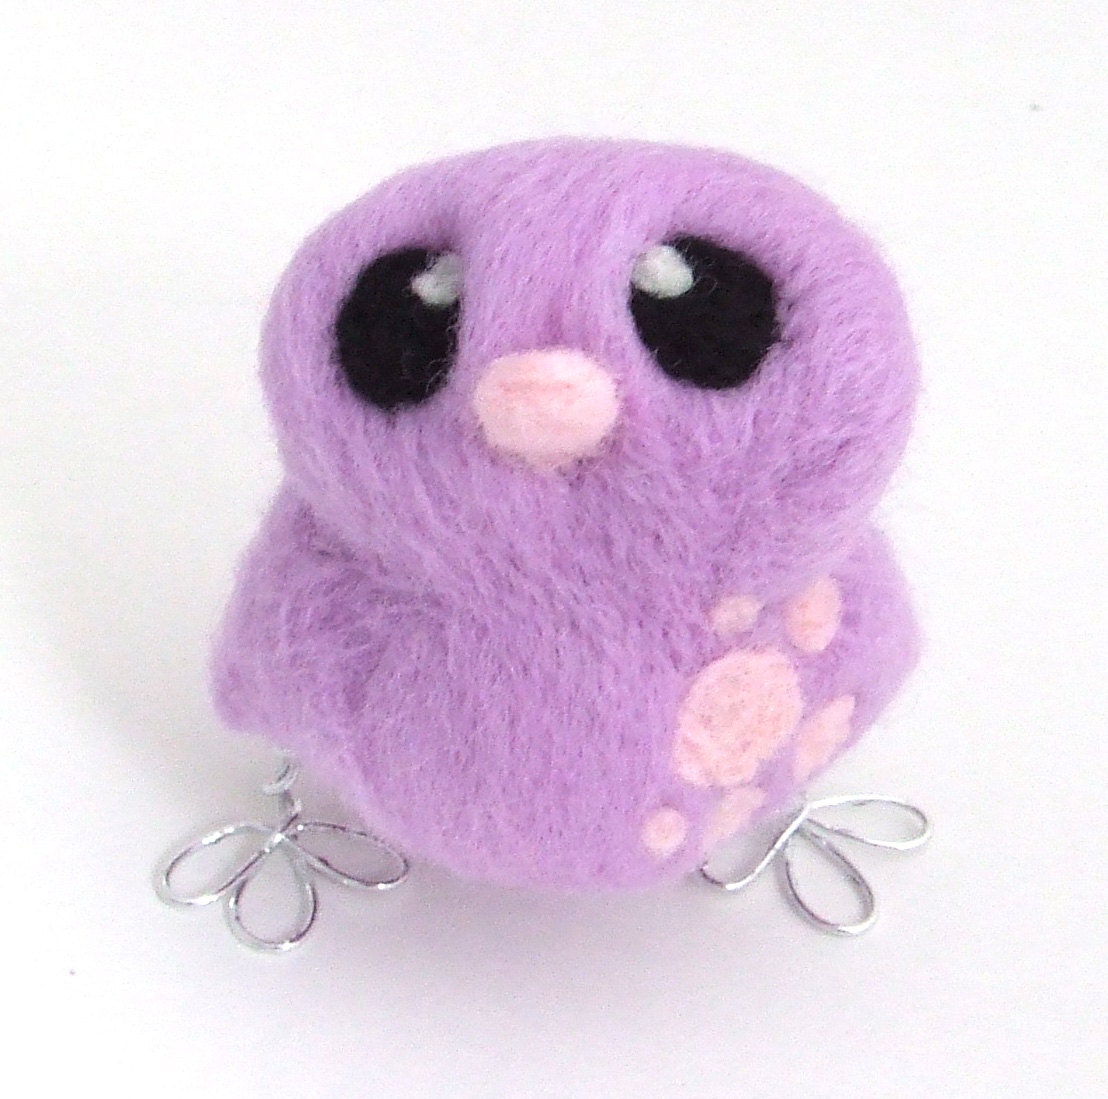 Easter Chick Needlefelted Bird in Lilac and Pale Pink - feltmeupdesigns